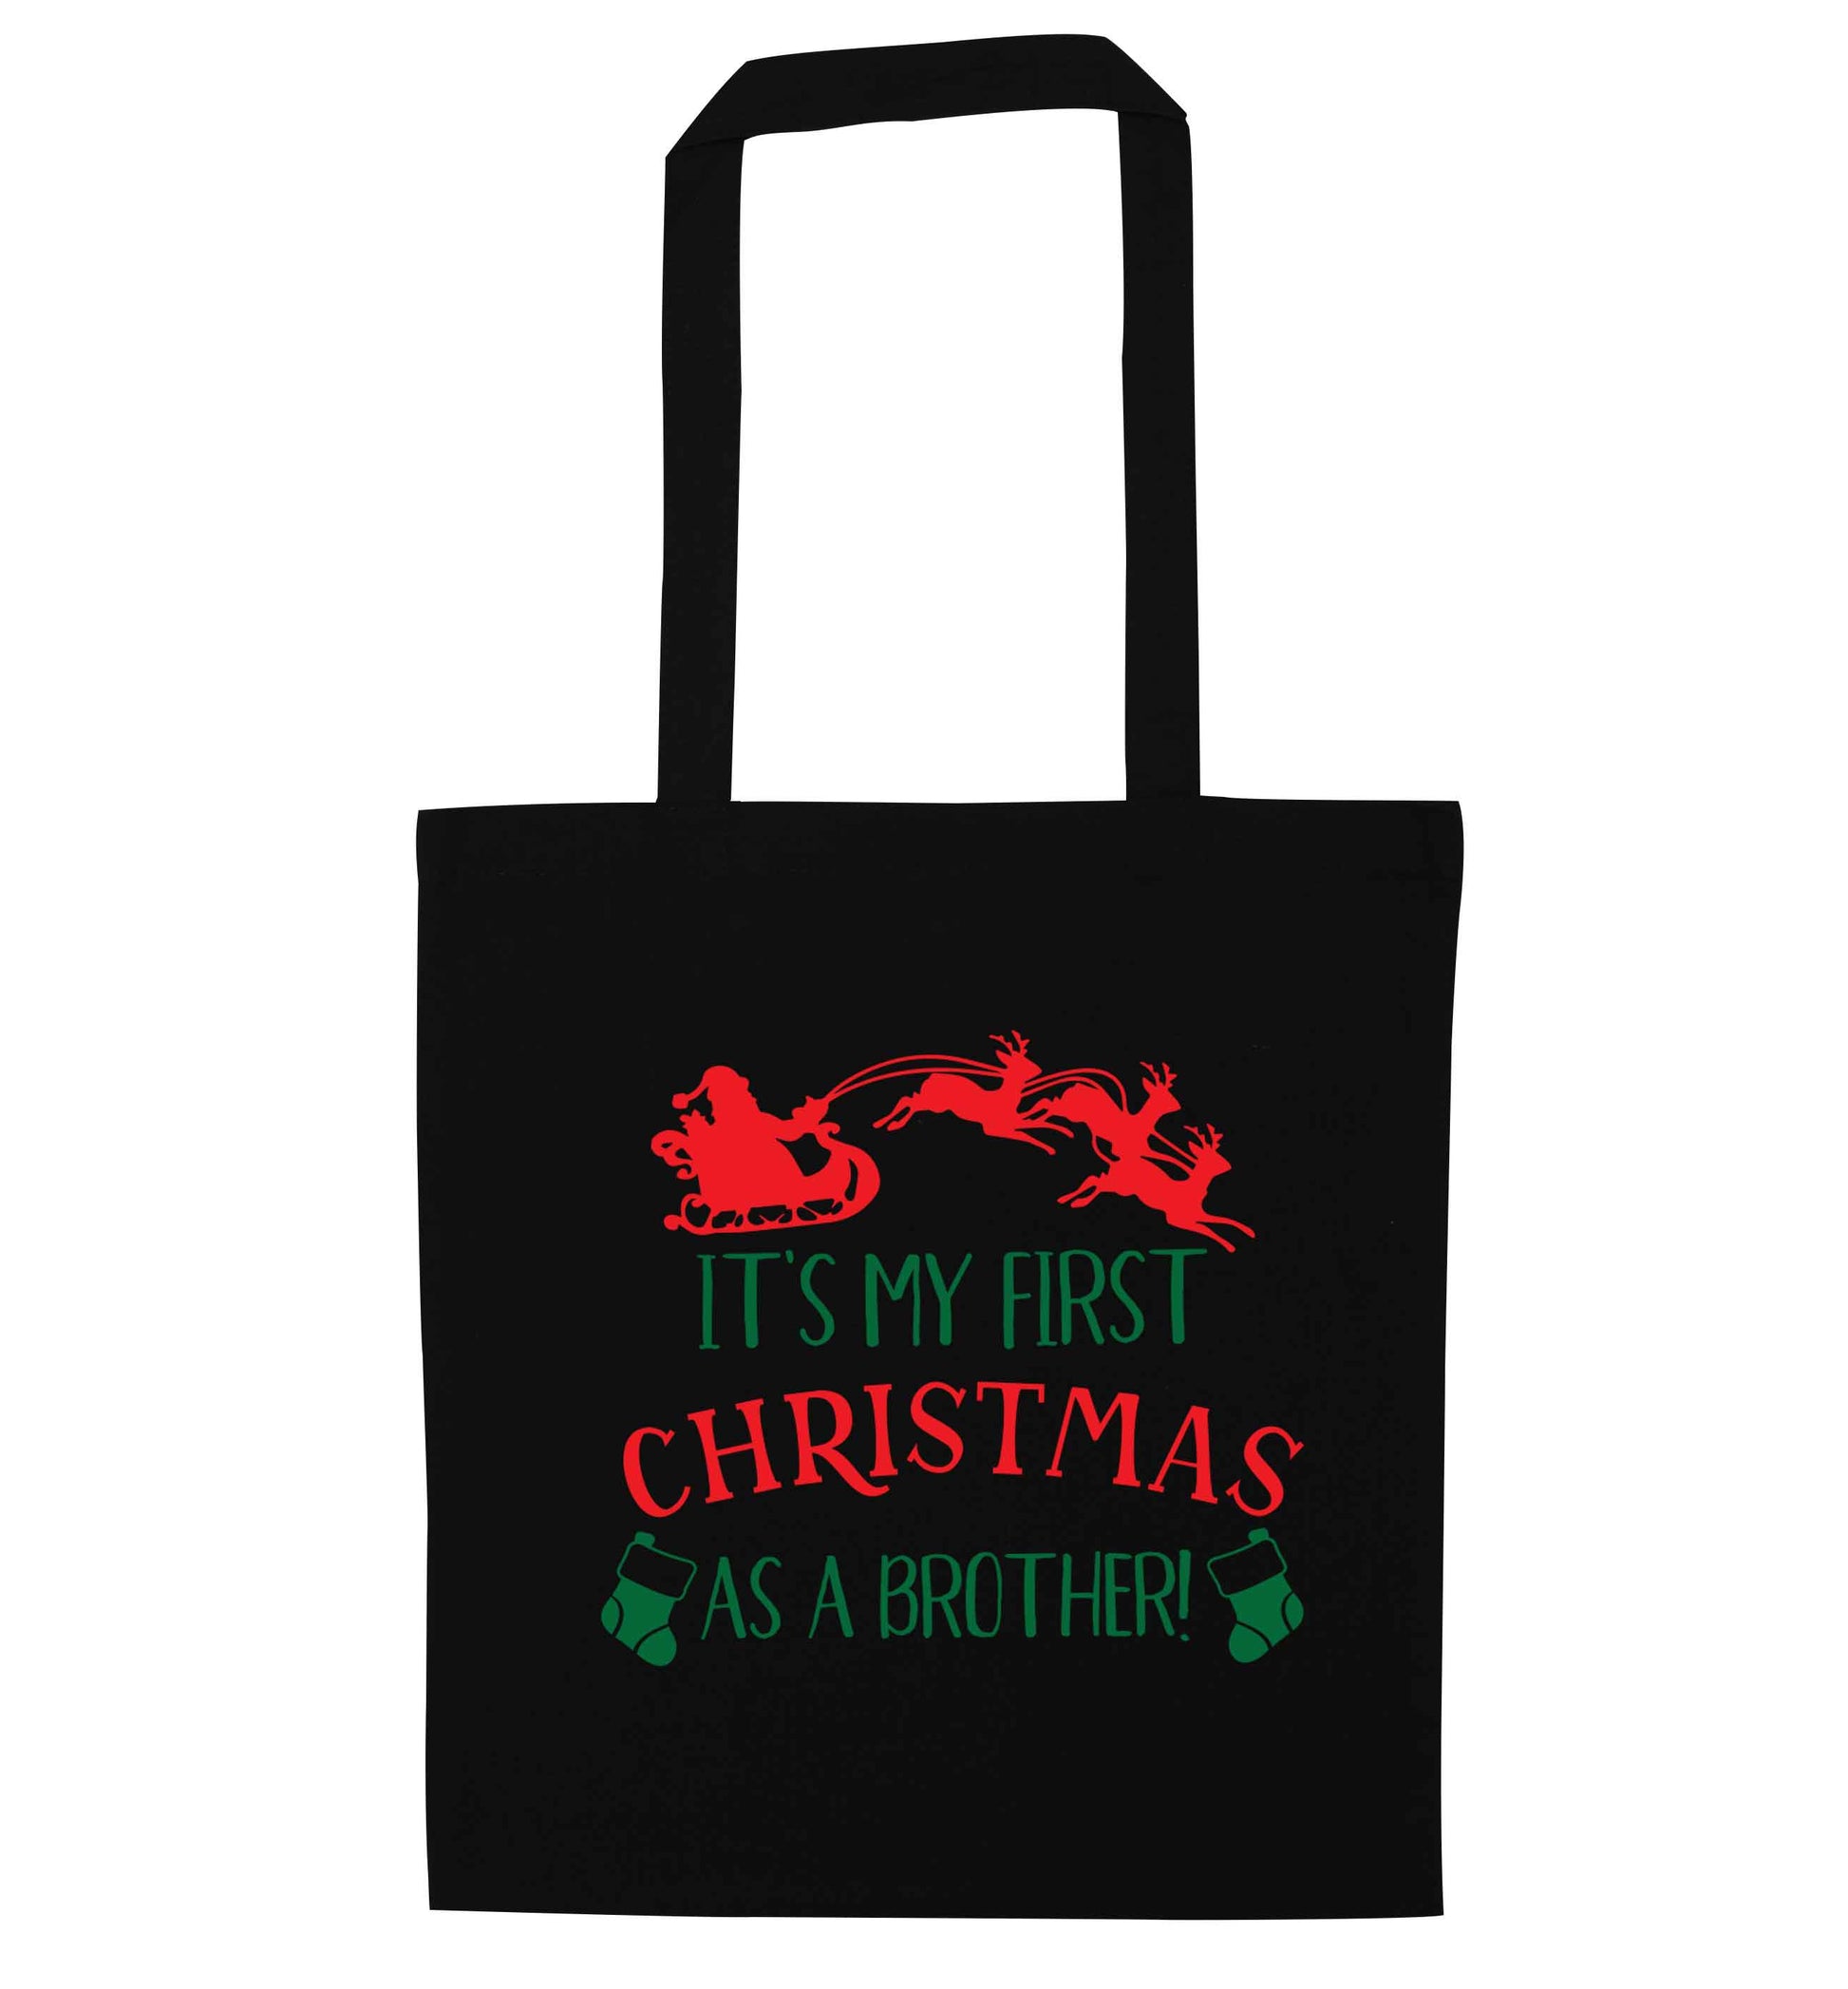 It's my first Christmas as a brother! black tote bag